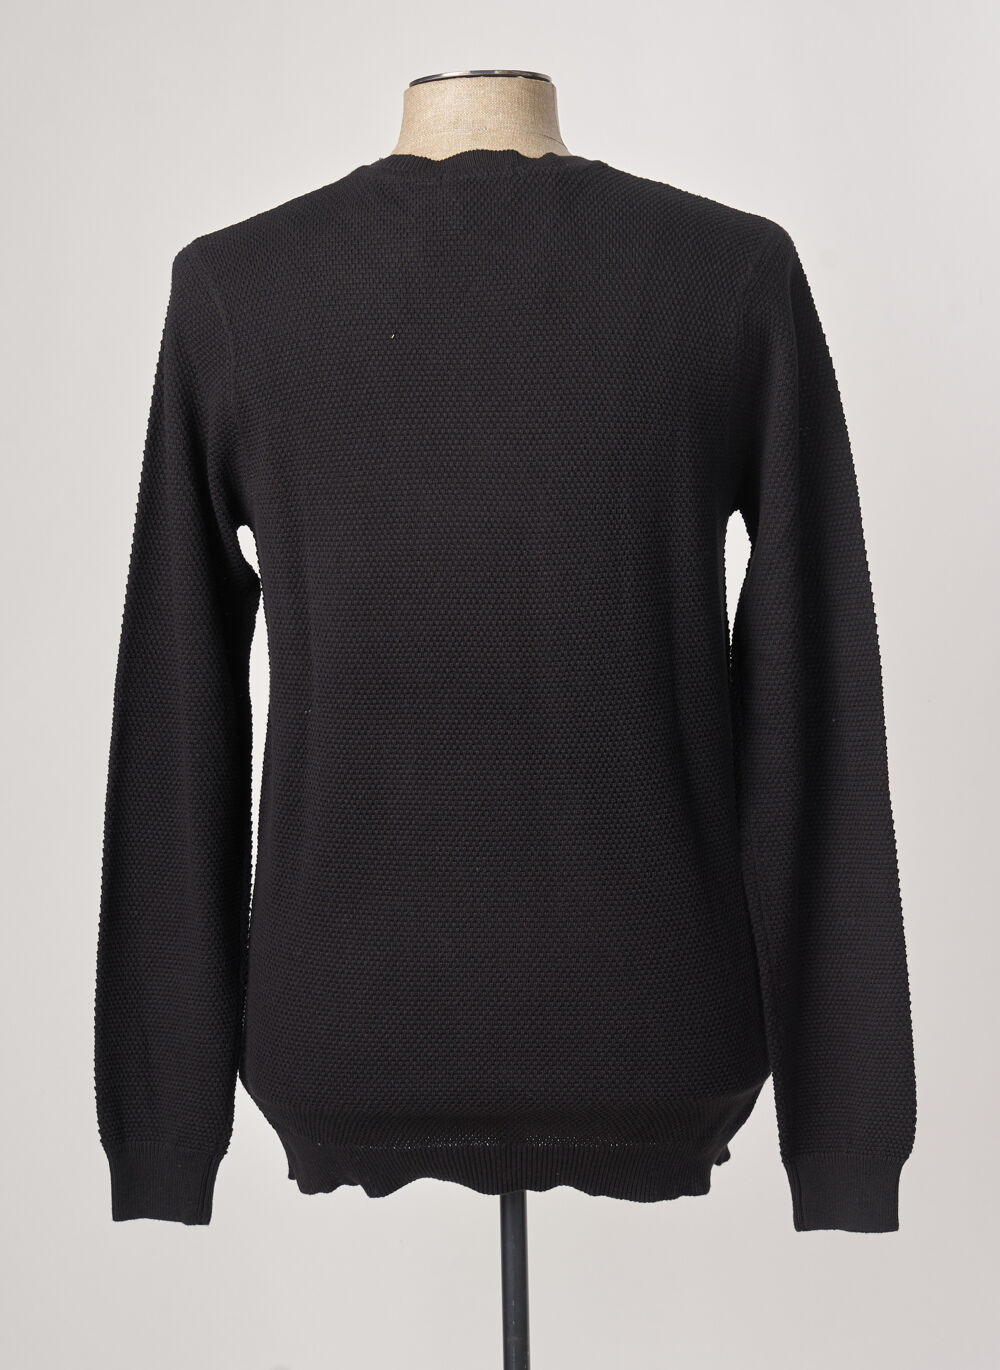 Pull homme Sorbino noir taille : XL Vtements